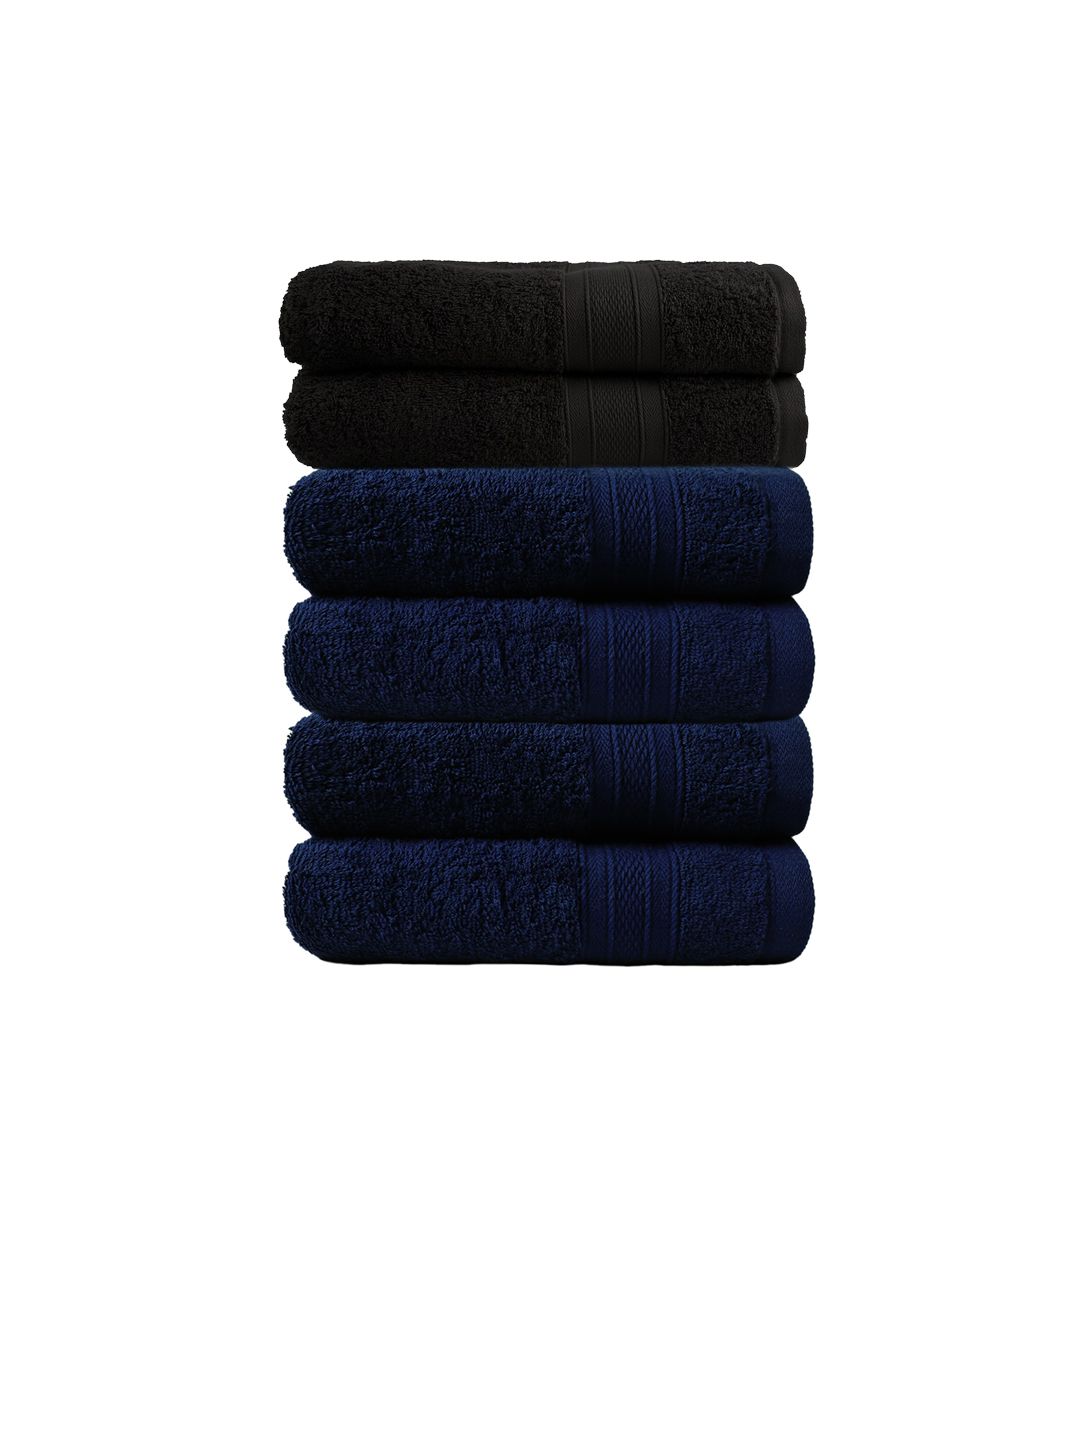 Trident Black Set of 2 500 GSM Cotton Bath Towels & Set of 4 Hand Towels Price in India